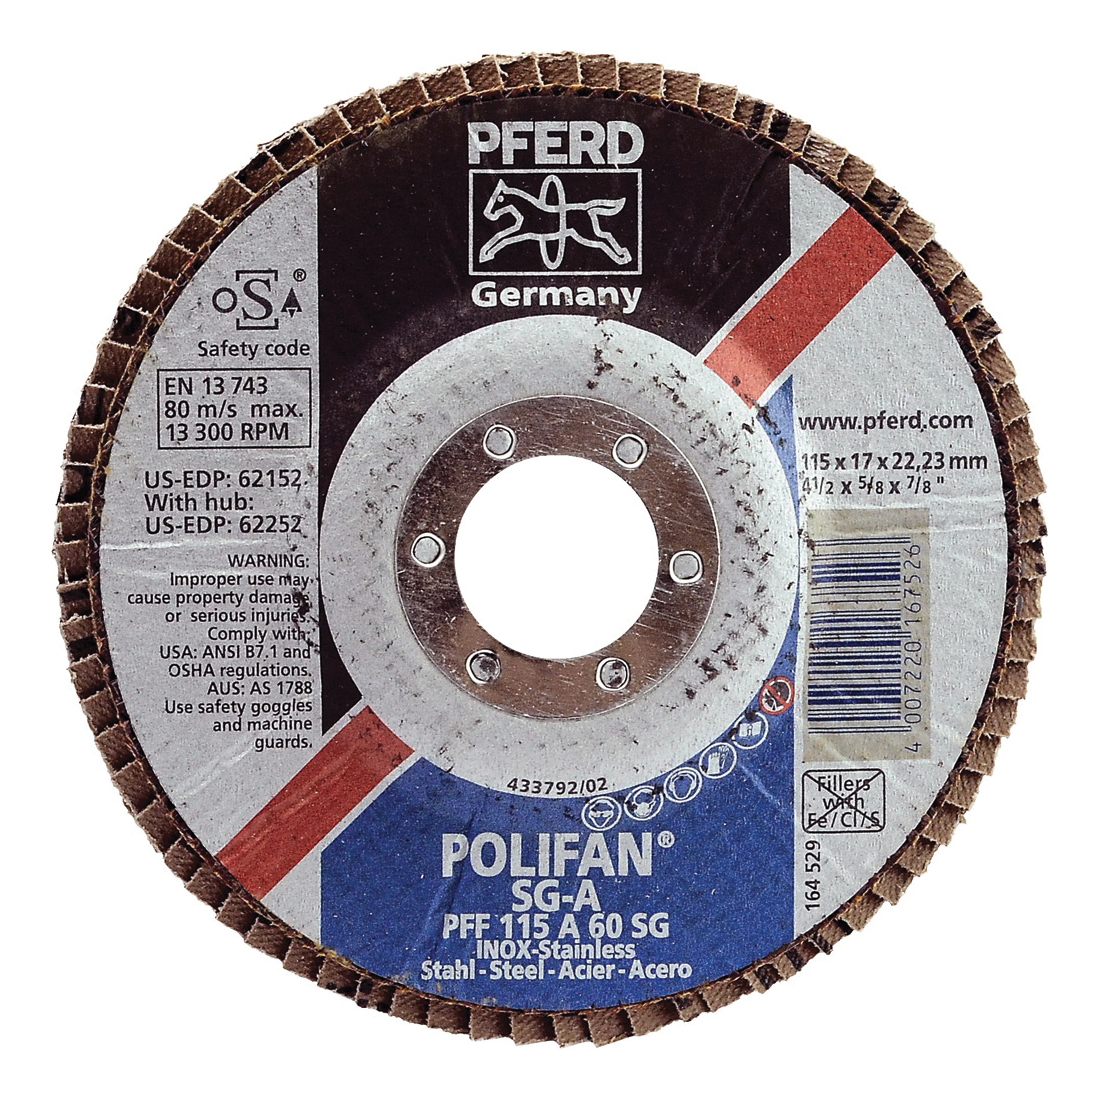 PFERD Polifan® 62152 Performance Line SG A Unthreaded Coated Abrasive Flap Disc, 4-1/2 in Dia, 7/8 in Center Hole, 60 Grit, Aluminum Oxide Abrasive, Type 27 Flat Disc